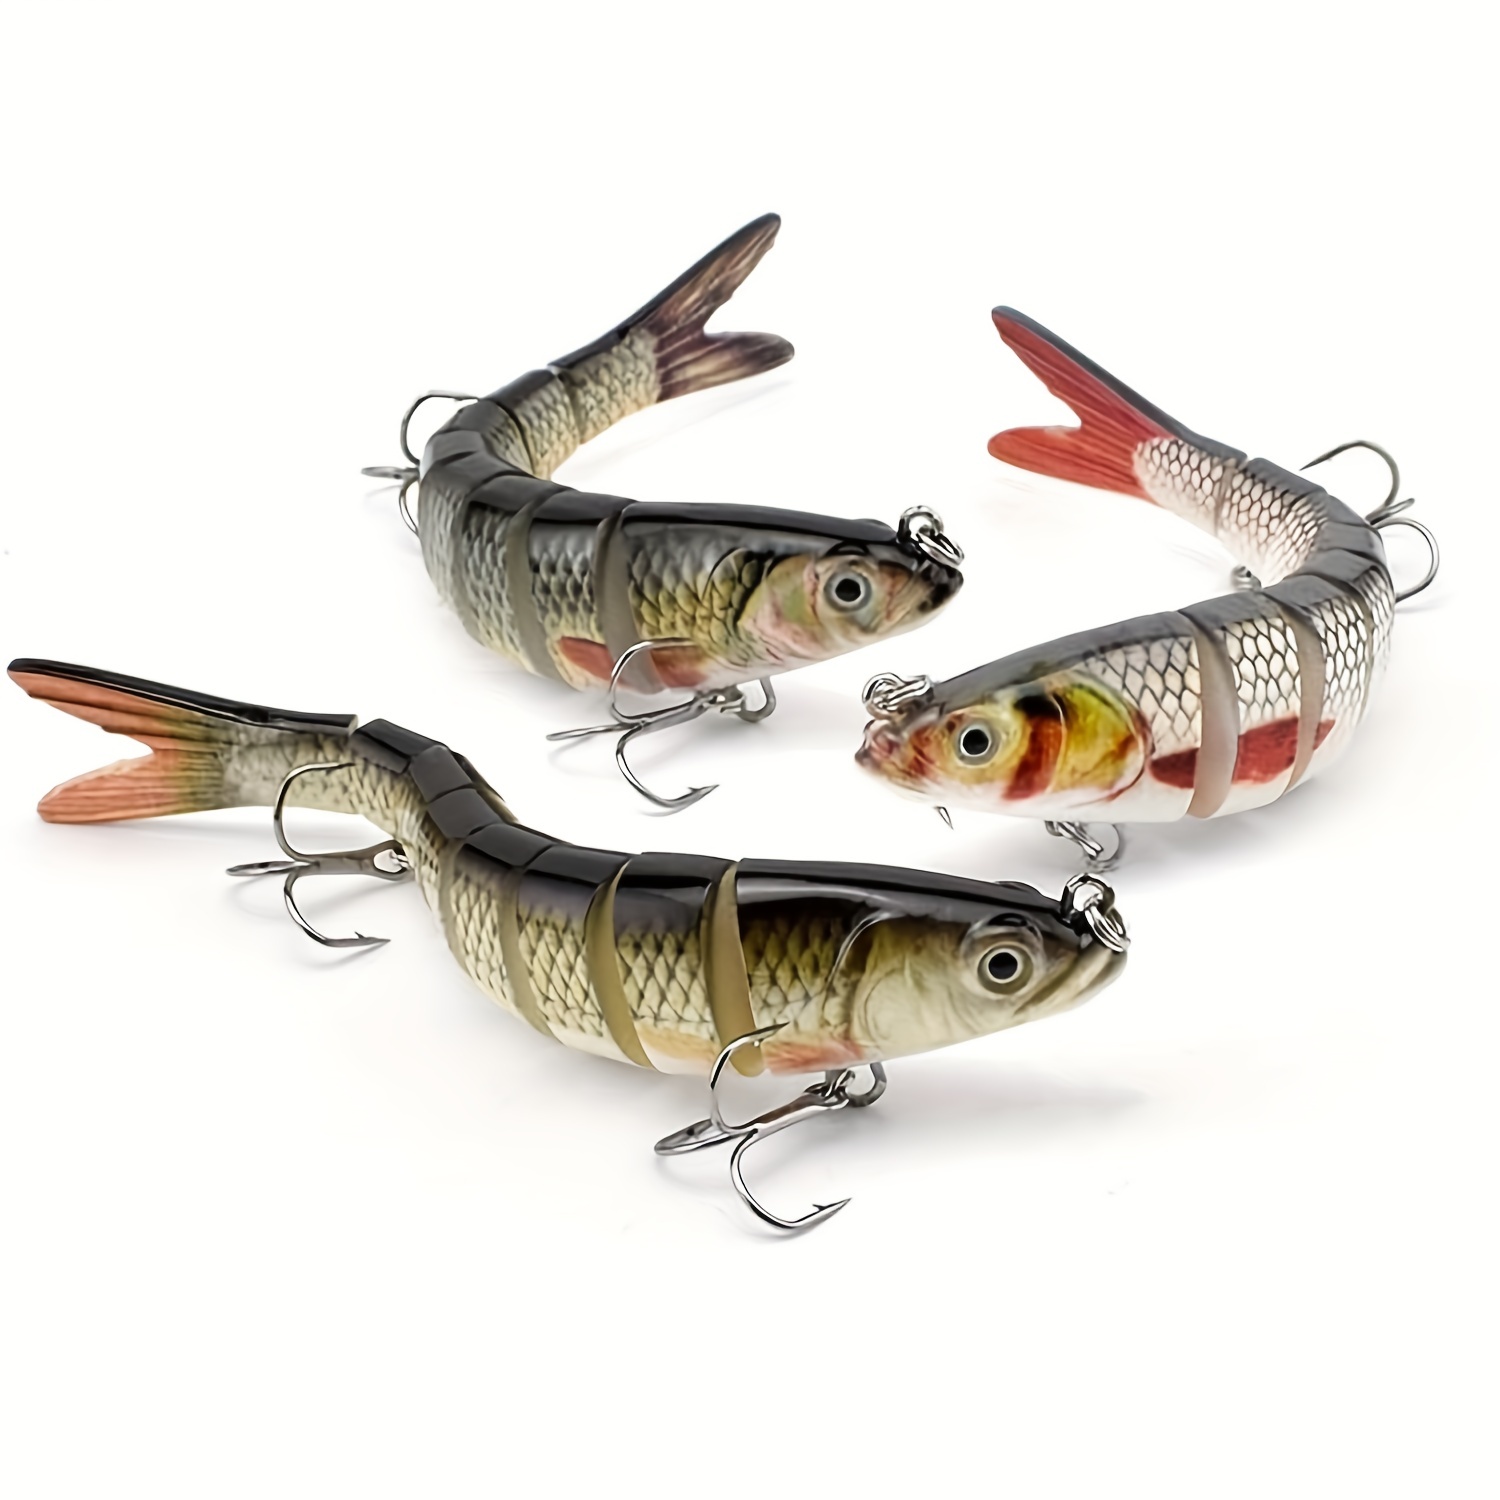  Goture Bass Fishing Lures, Multi Jointed Swimbaits for Bass  Fishing, Slow Sinking Swimming Bait, Topwater Fishing Lures for Freshwater  Saltwater, Swimming Lures Swim Bait, 3pcs Bass Lures Kit : Sports